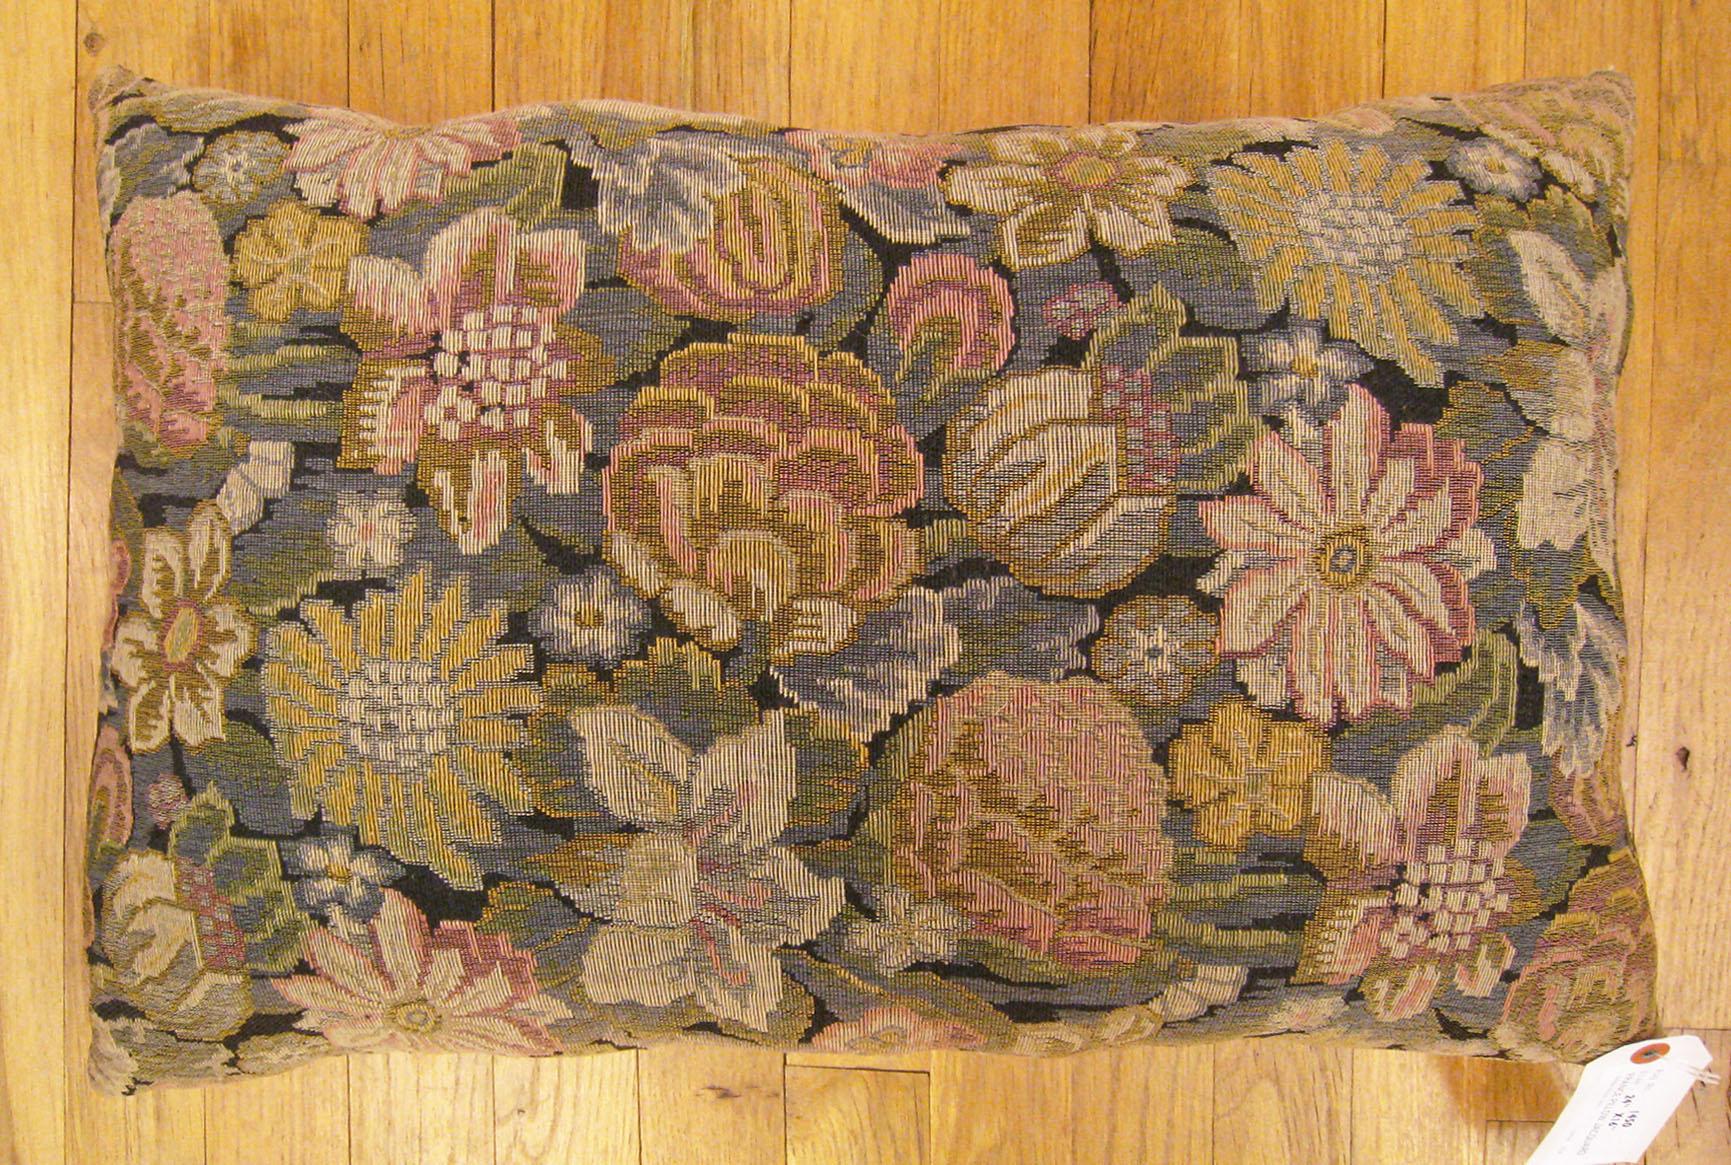 Antique Jacquard tapestry pillow; size 24” x 16” (2’ 0” x 1’ 4”).

An antique decorative pillow with floral elments allover a green central field, size 24” x 16” (2’ 0” x 1’ 4”). This lovely decorative pillow features an antique fabric on front